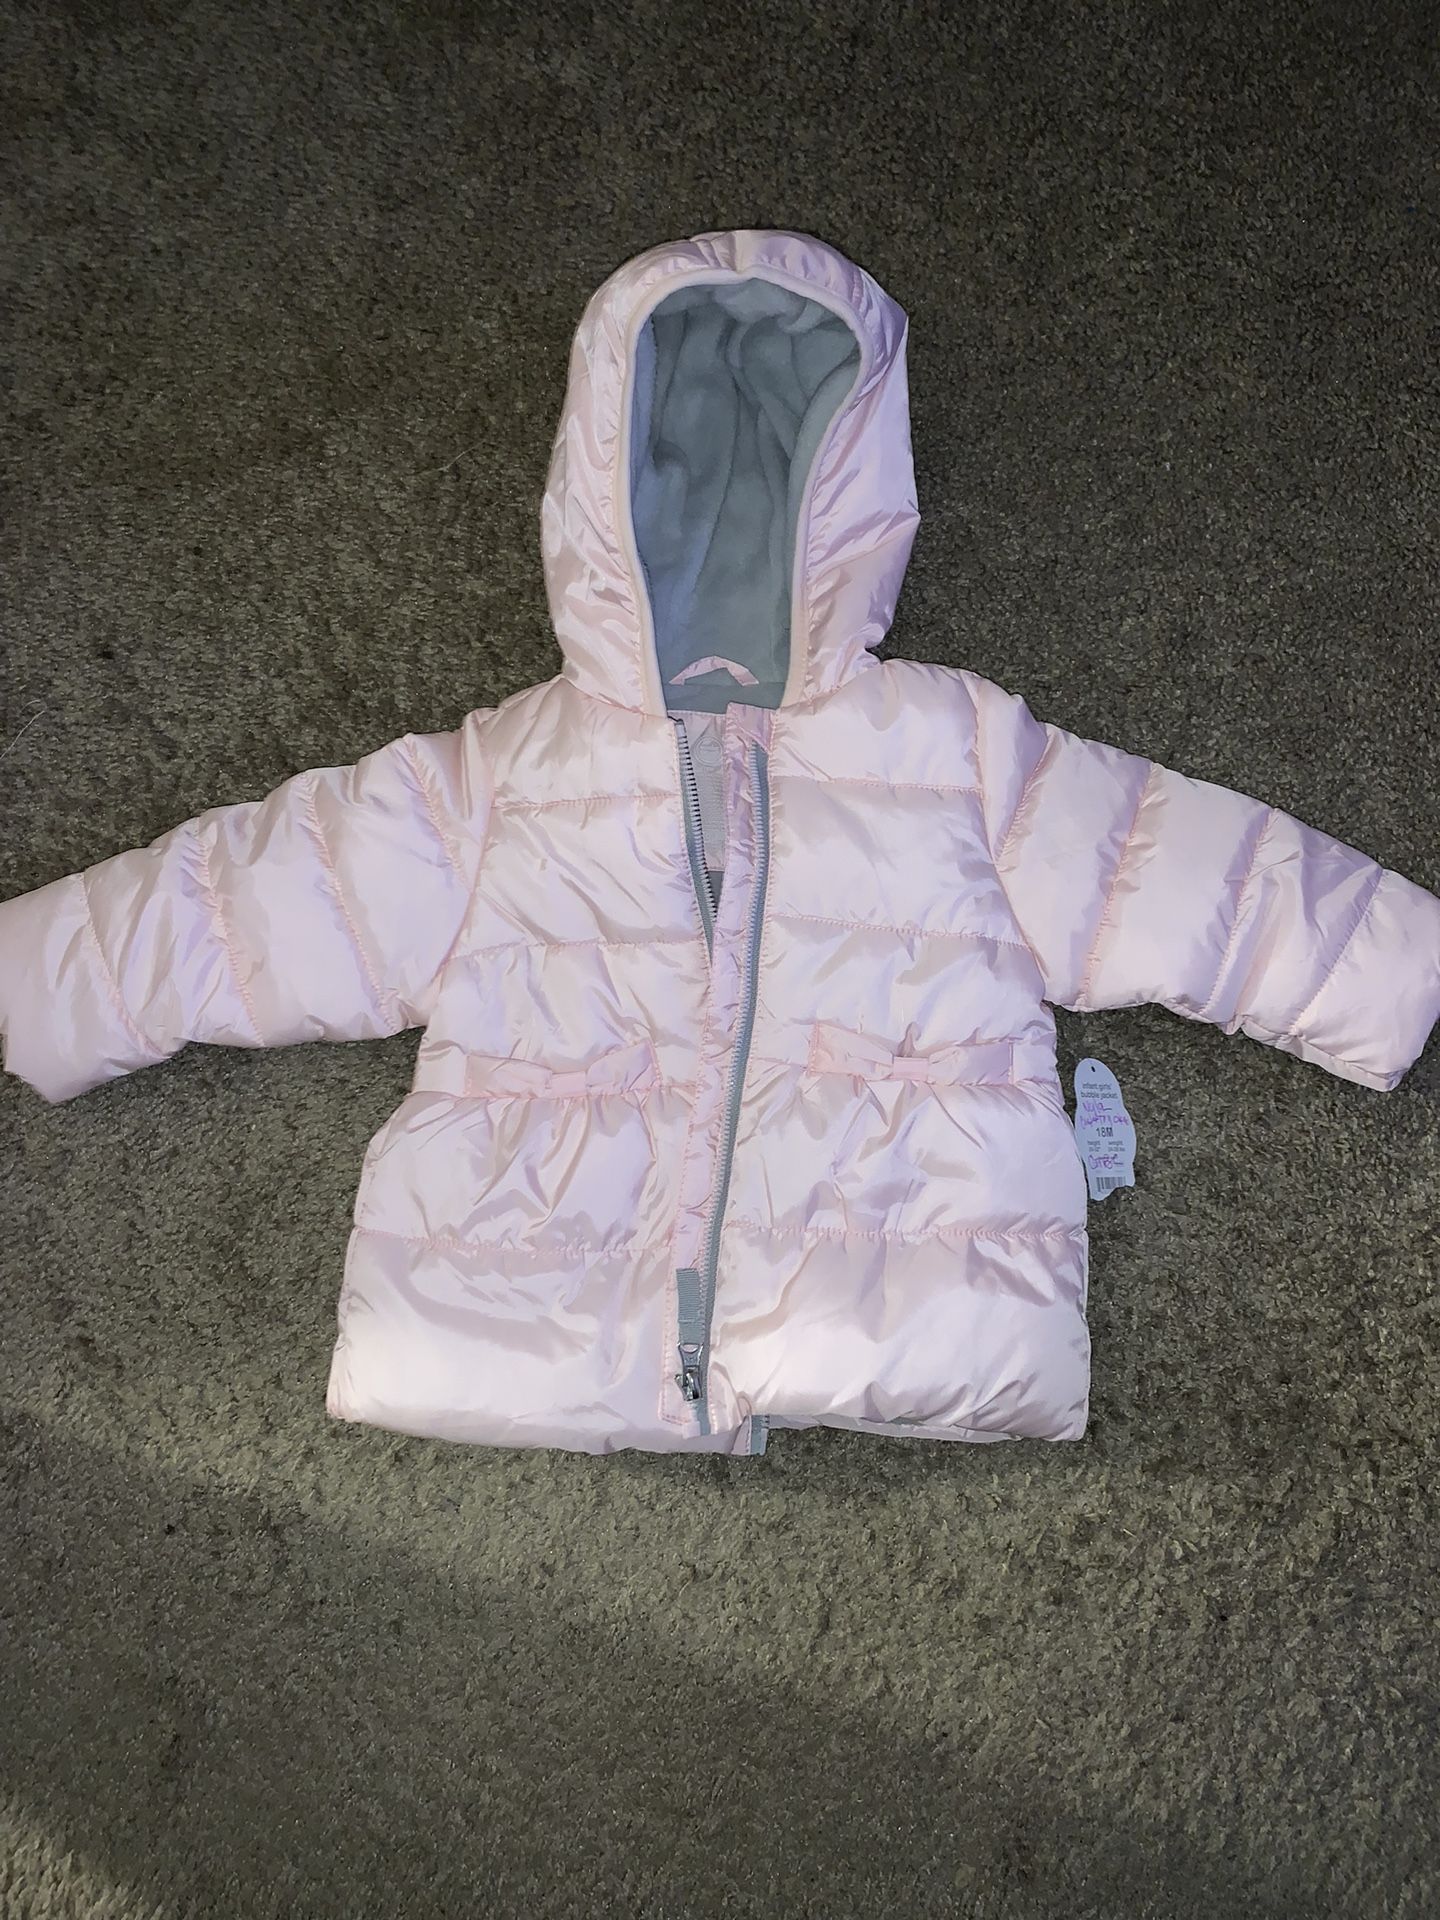 Baby girl pink jacket Size 18m BRAND NEW 